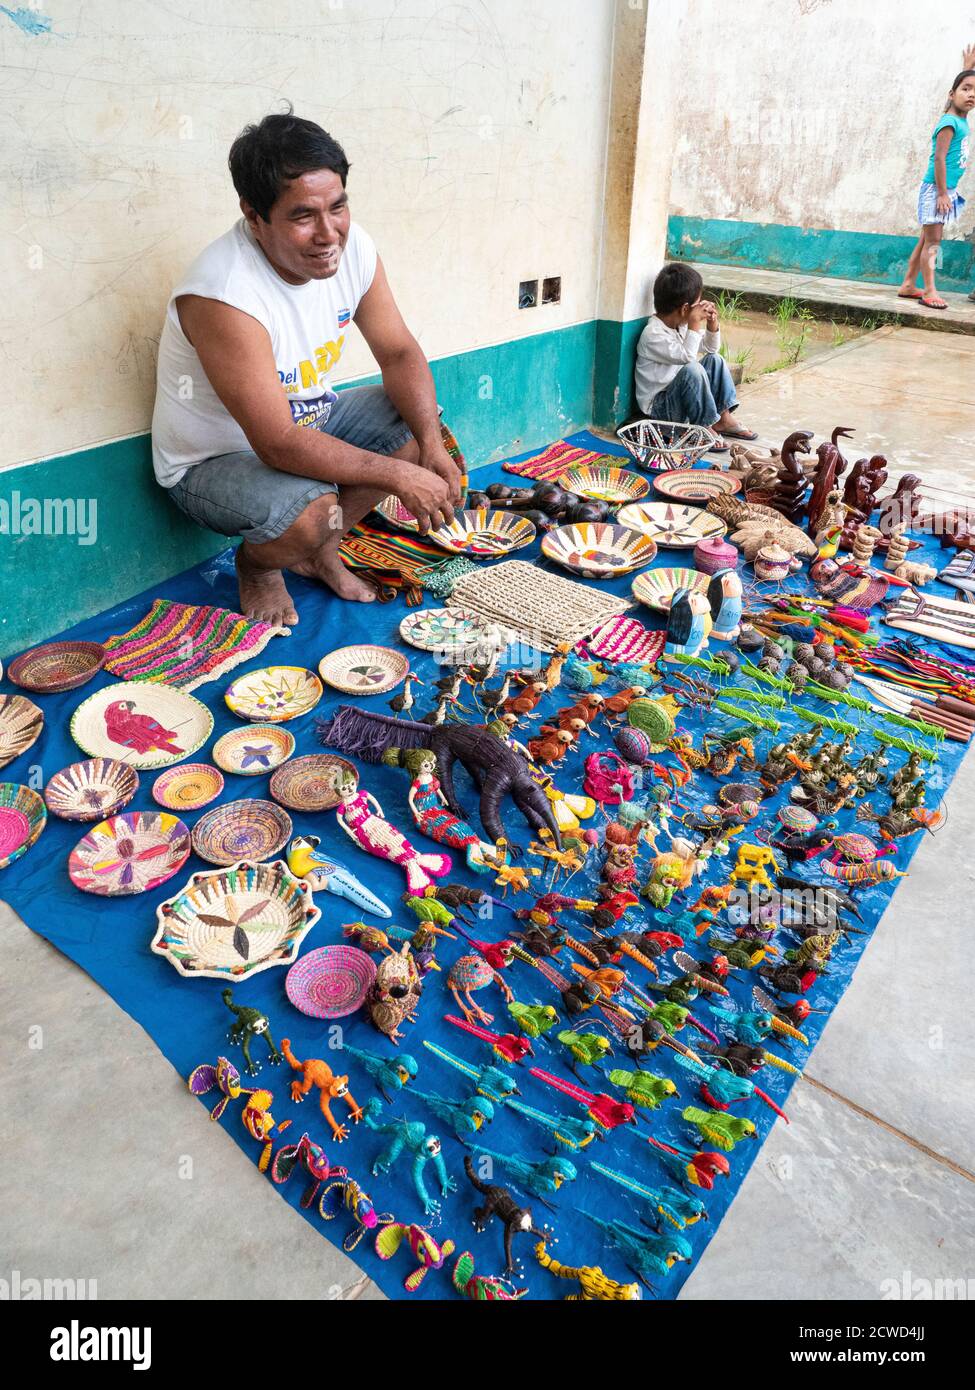 Local people selling their wares in San Francisco Village, Amazon Basin, Peru. Stock Photo